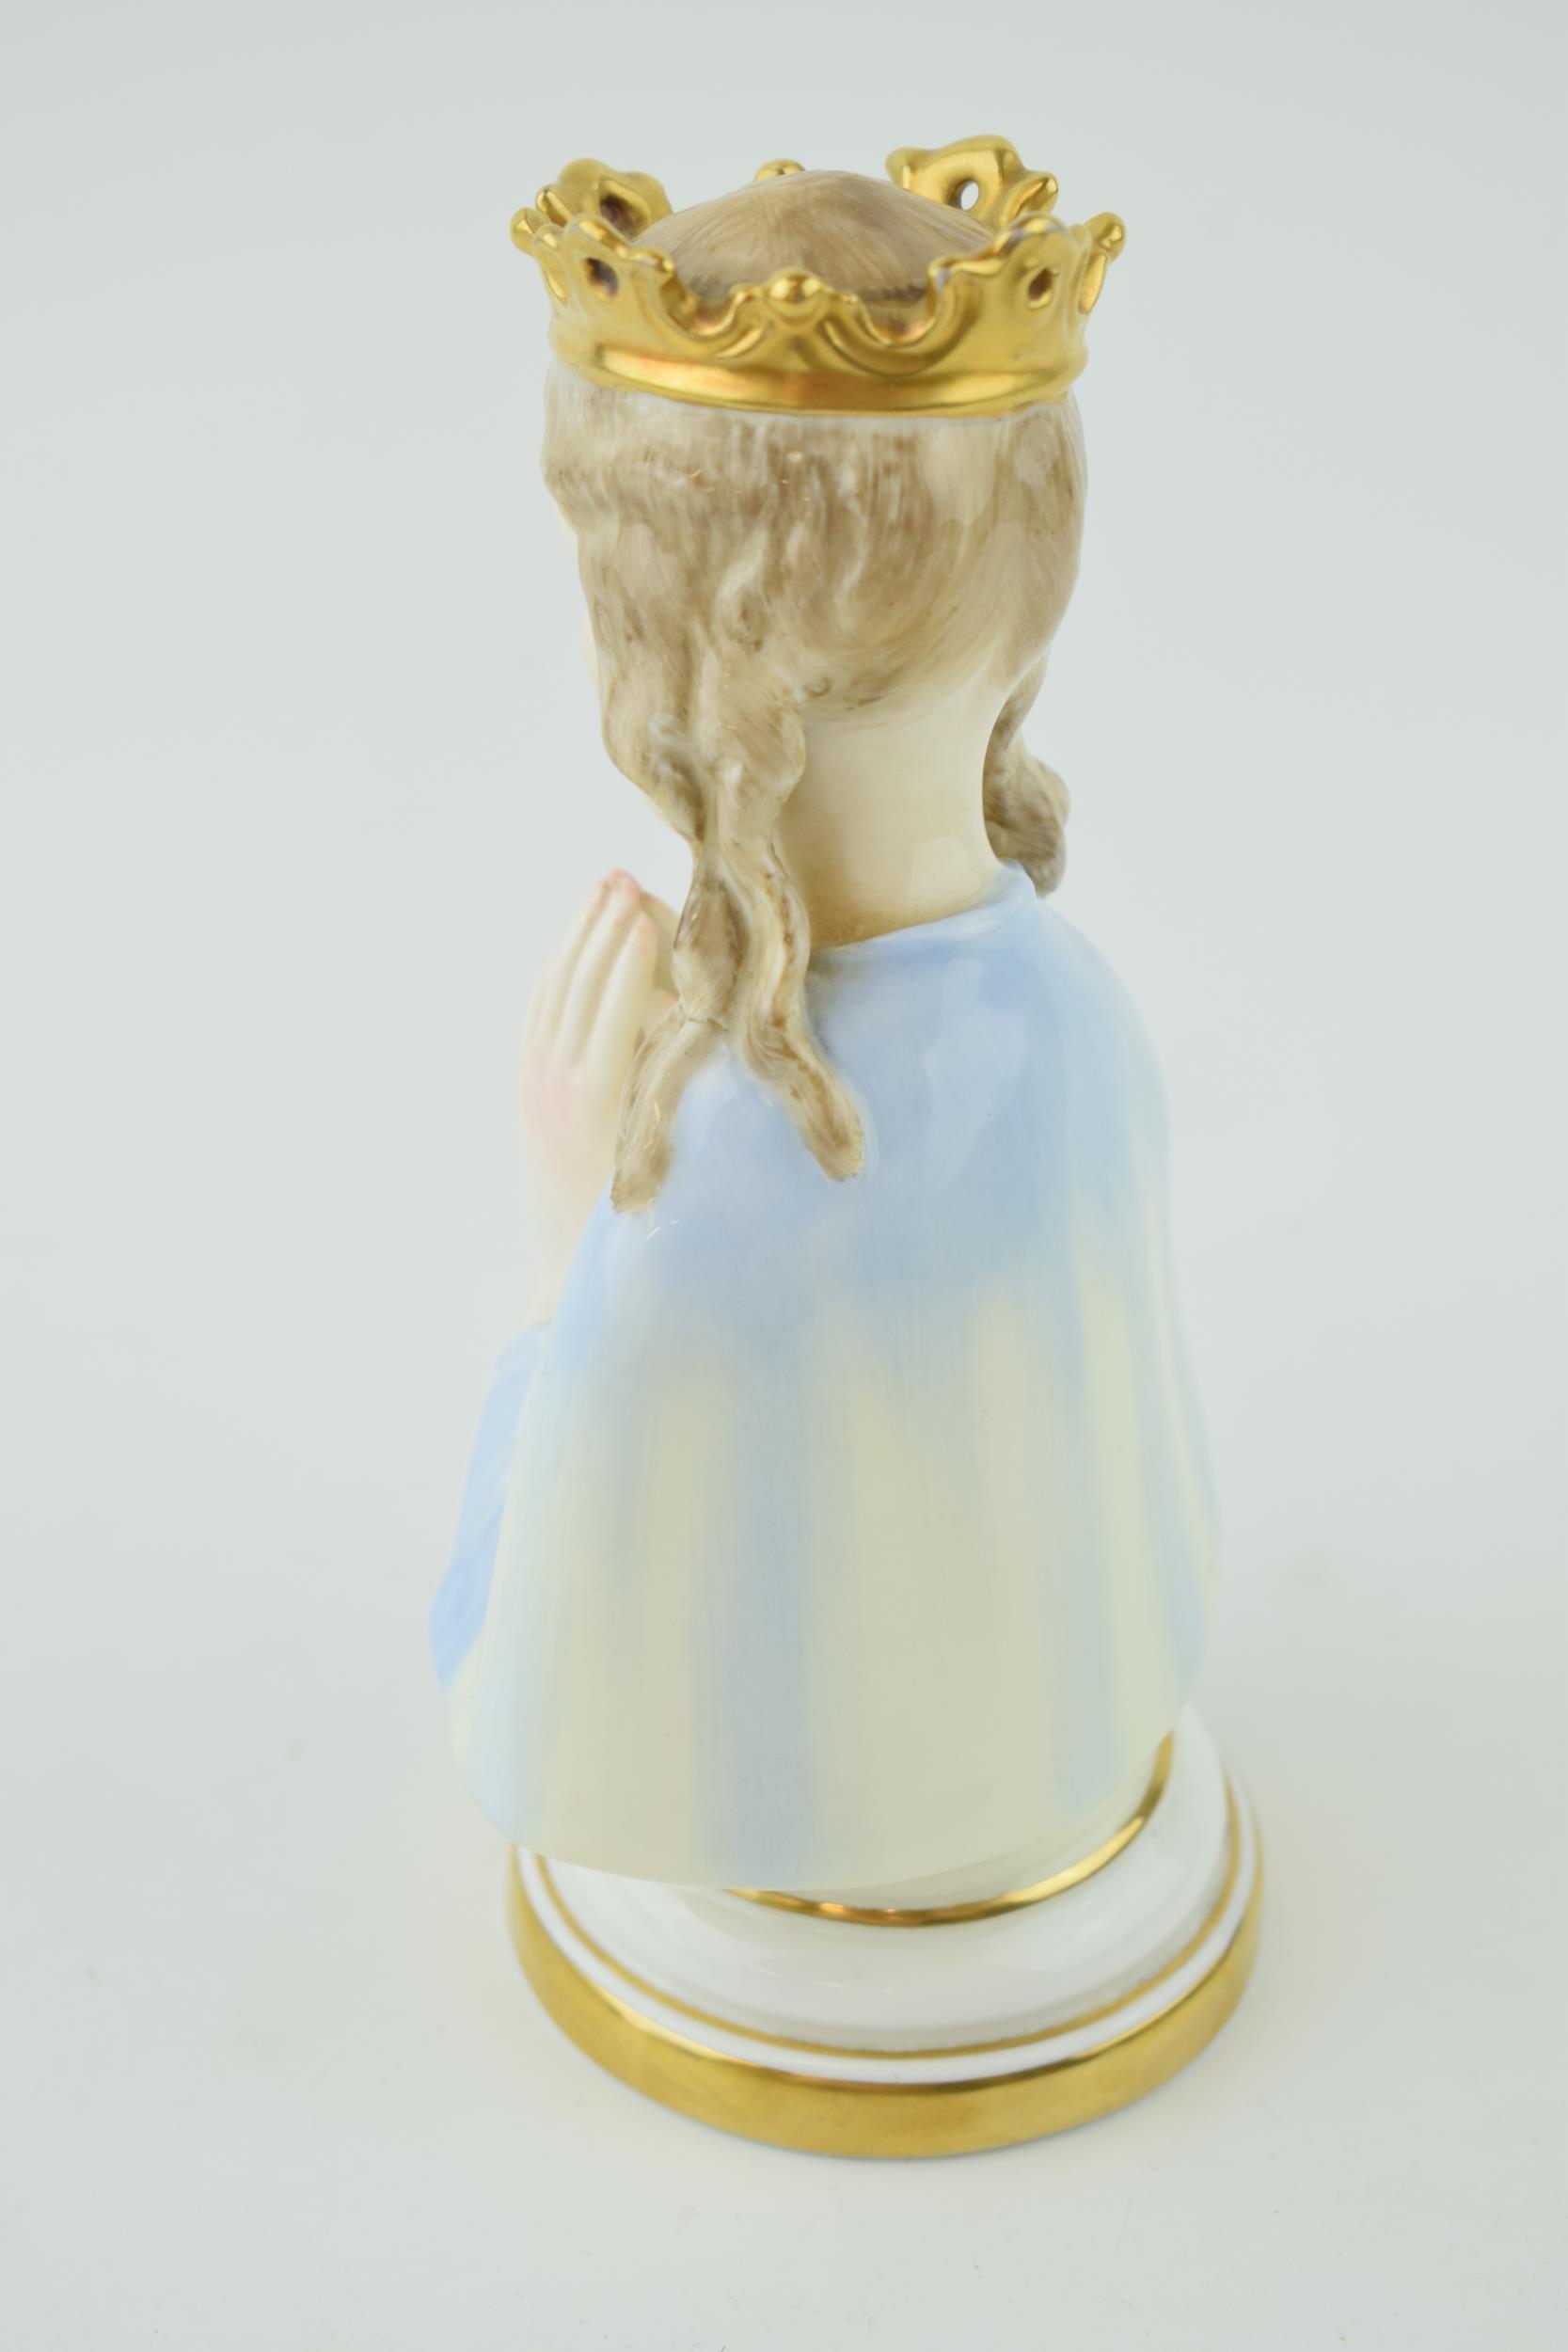 Paragon bust of Madonna, 16cm tall. In good condition with no obvious damage or restoration. - Image 2 of 3